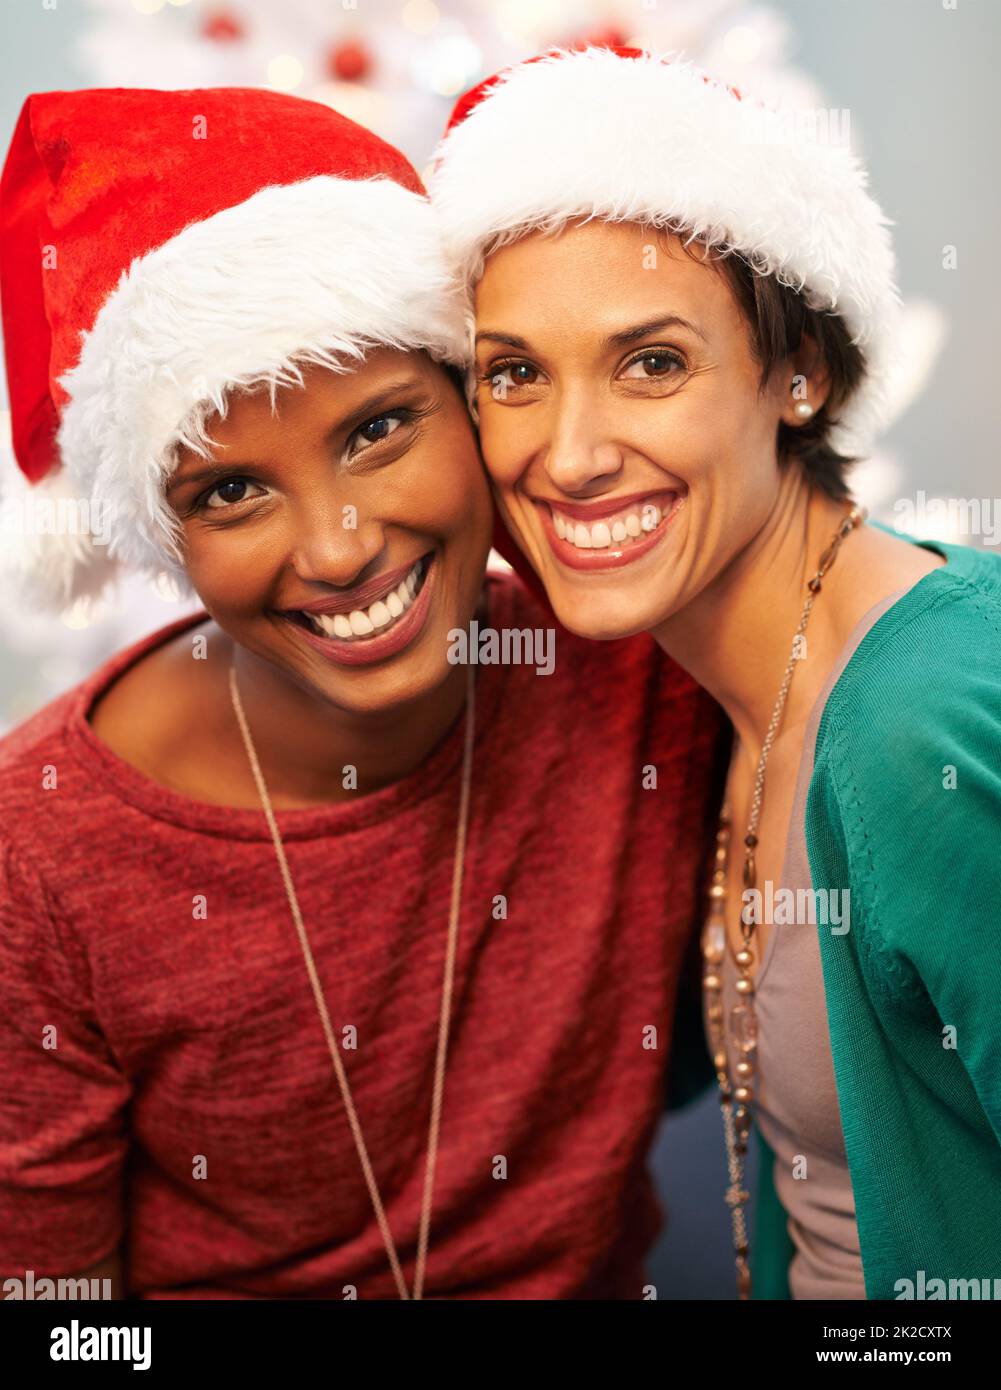 Santas little helpers. A portrait of two happy best friends wearing santa hats at Christmastime. Stock Photo